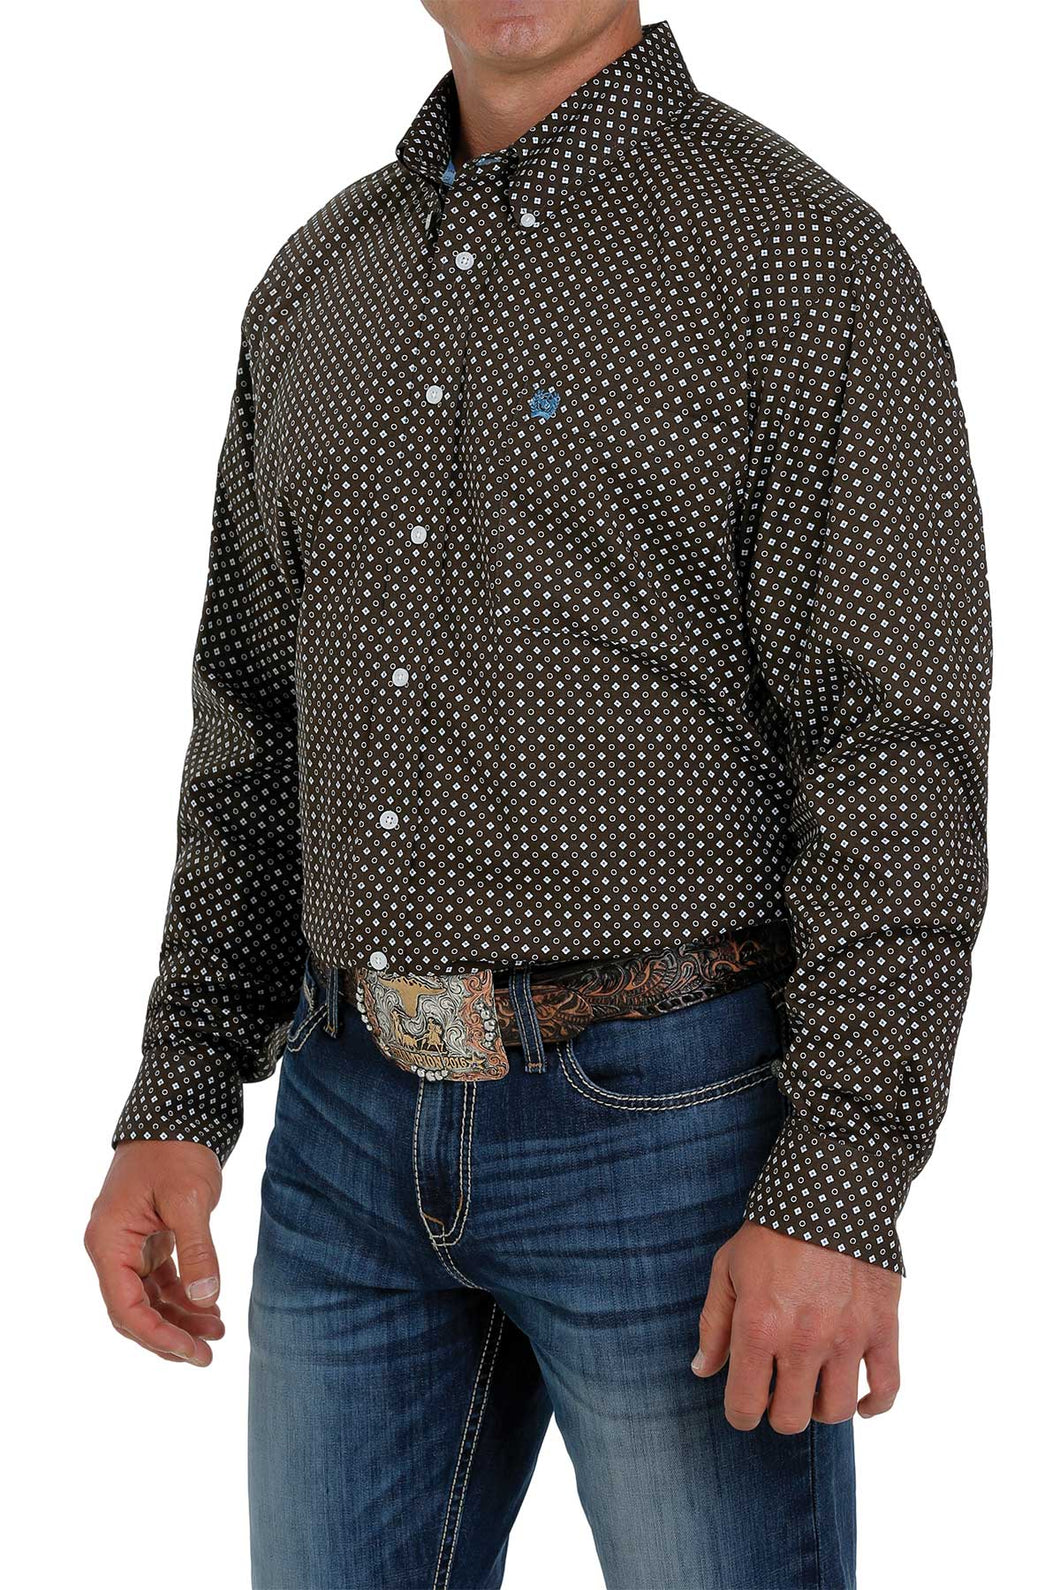 MEN'S STRETCH BROWN, WHITE AND BLUE MEDALLION AND DOT PRINT BUTTON-DOWN SHIRT